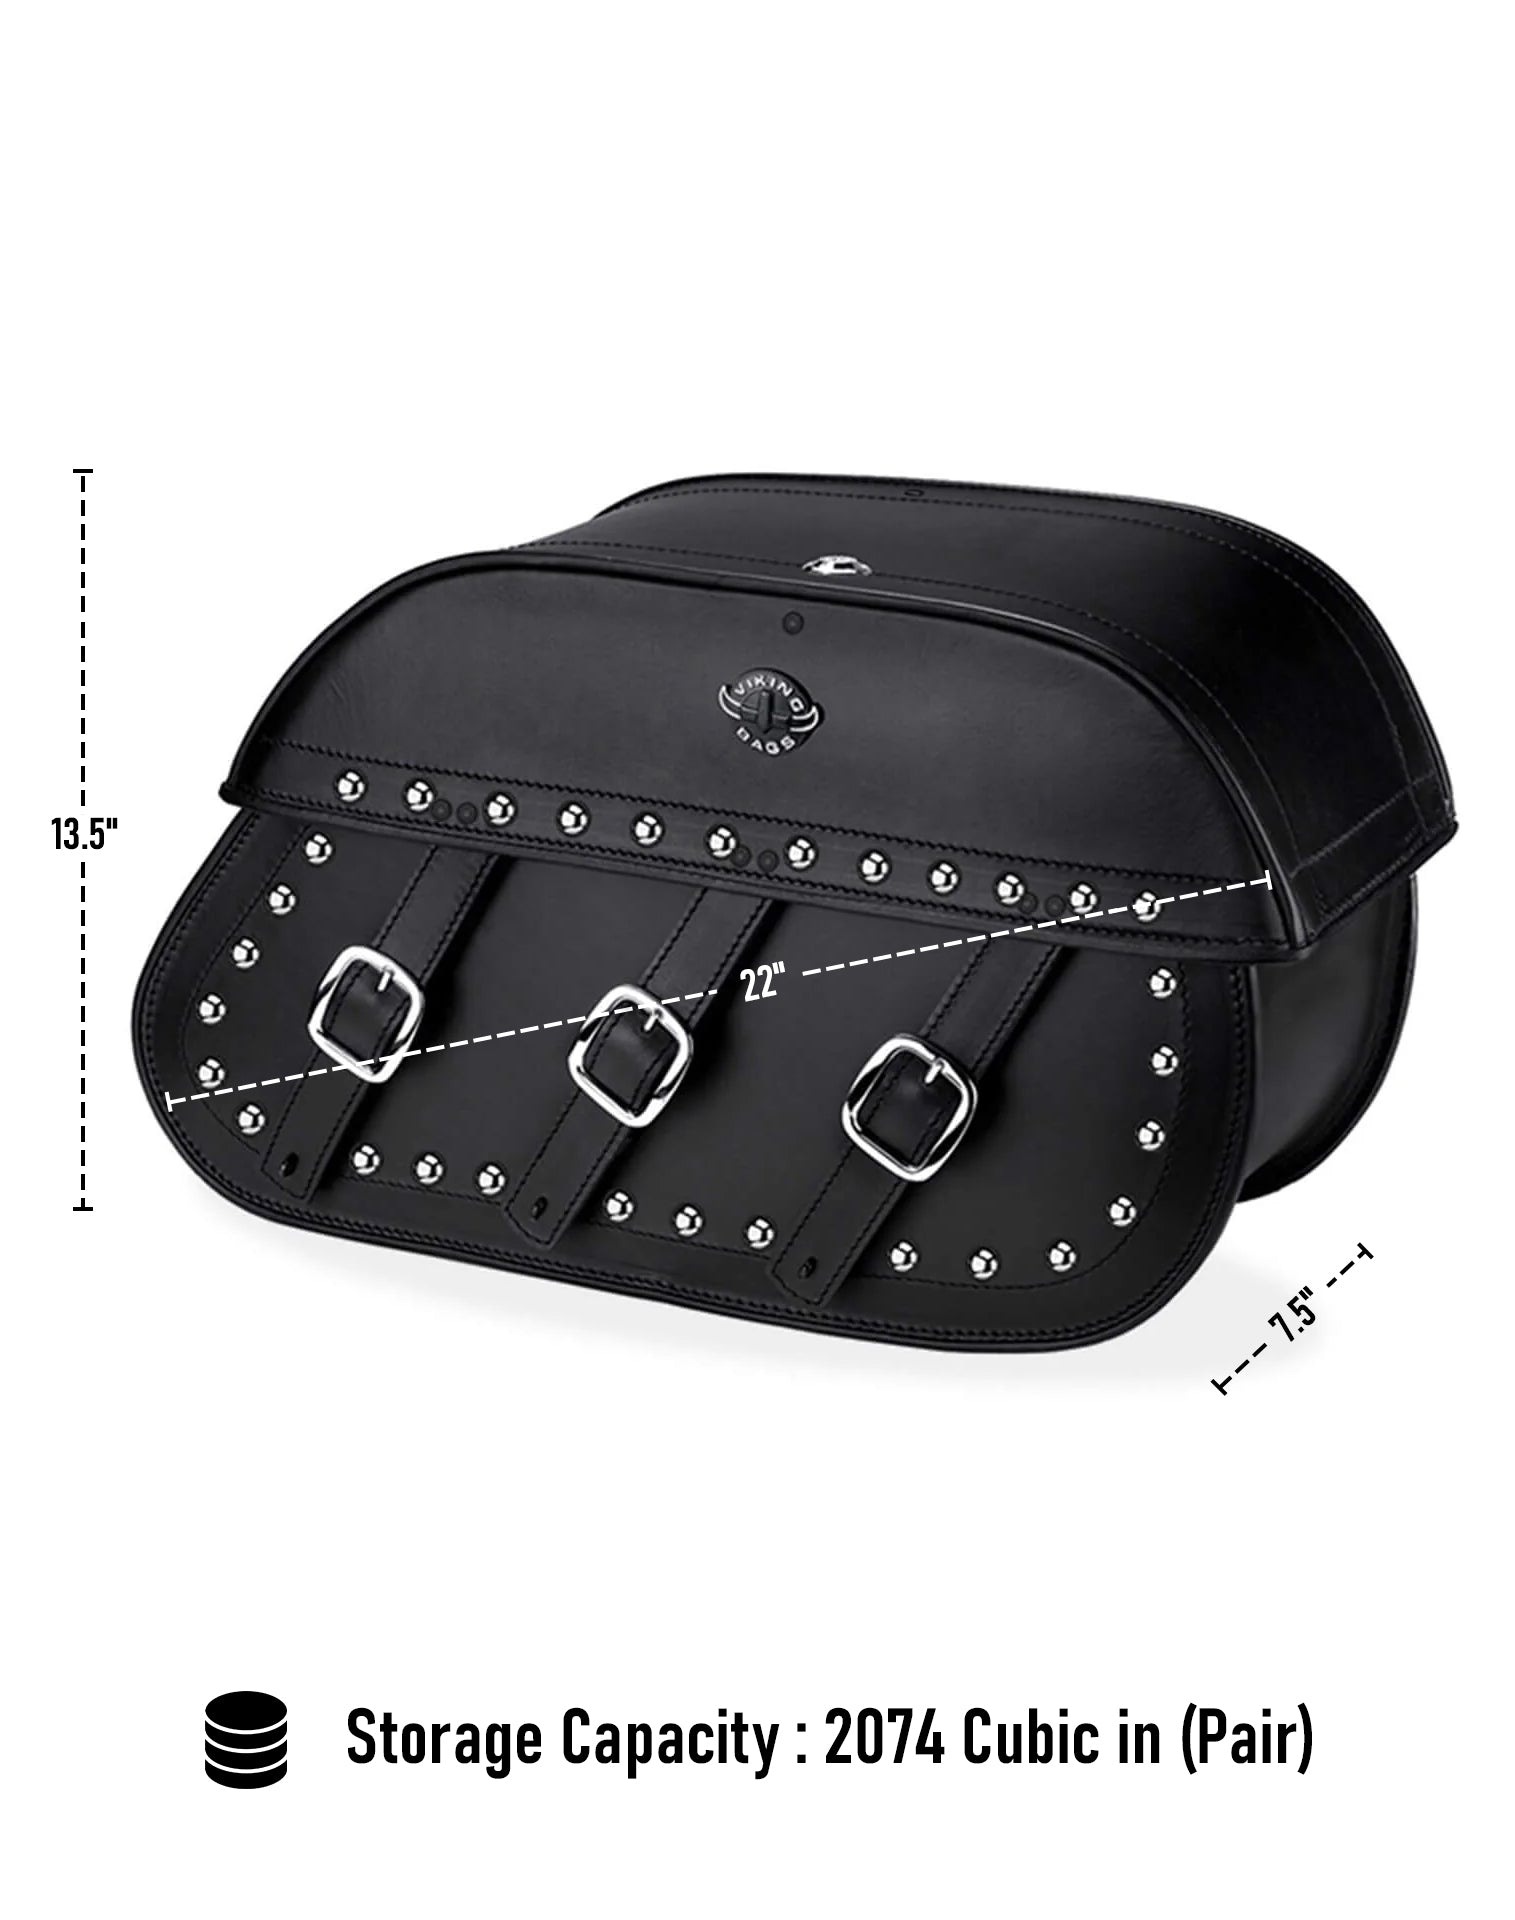 Viking Trianon Extra Large Yamaha Stratoliner Xv 1900 Studded Leather Motorcycle Saddlebags Can Store Your Ridings Gears